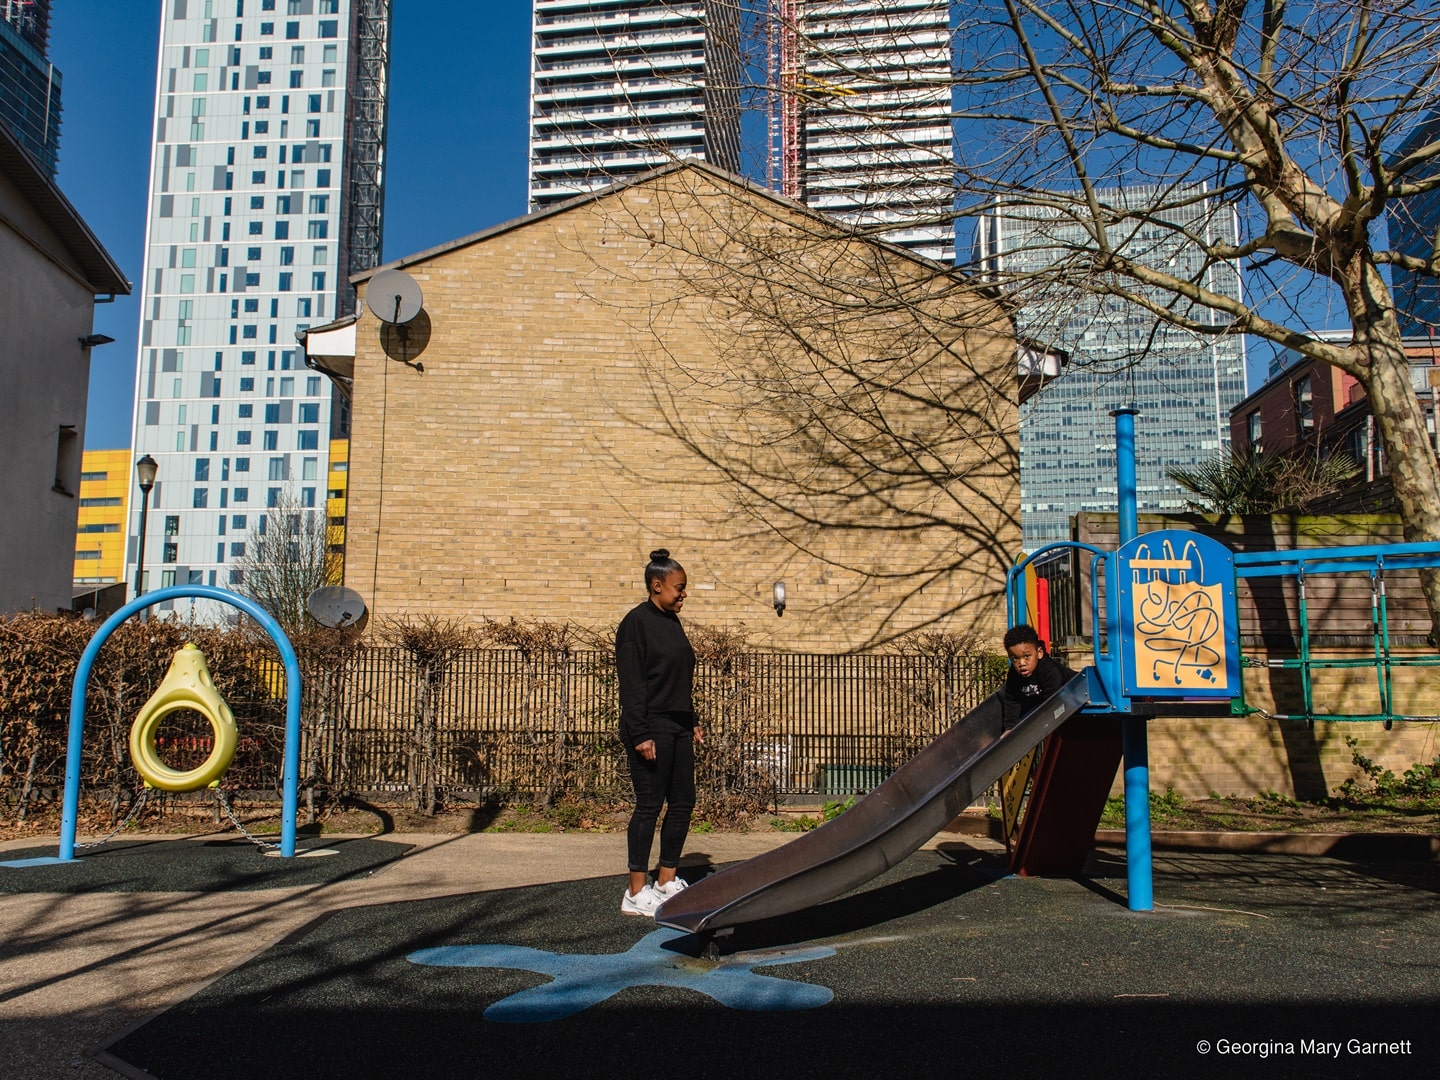 mom and child at a playground in Tower Hamlets in London